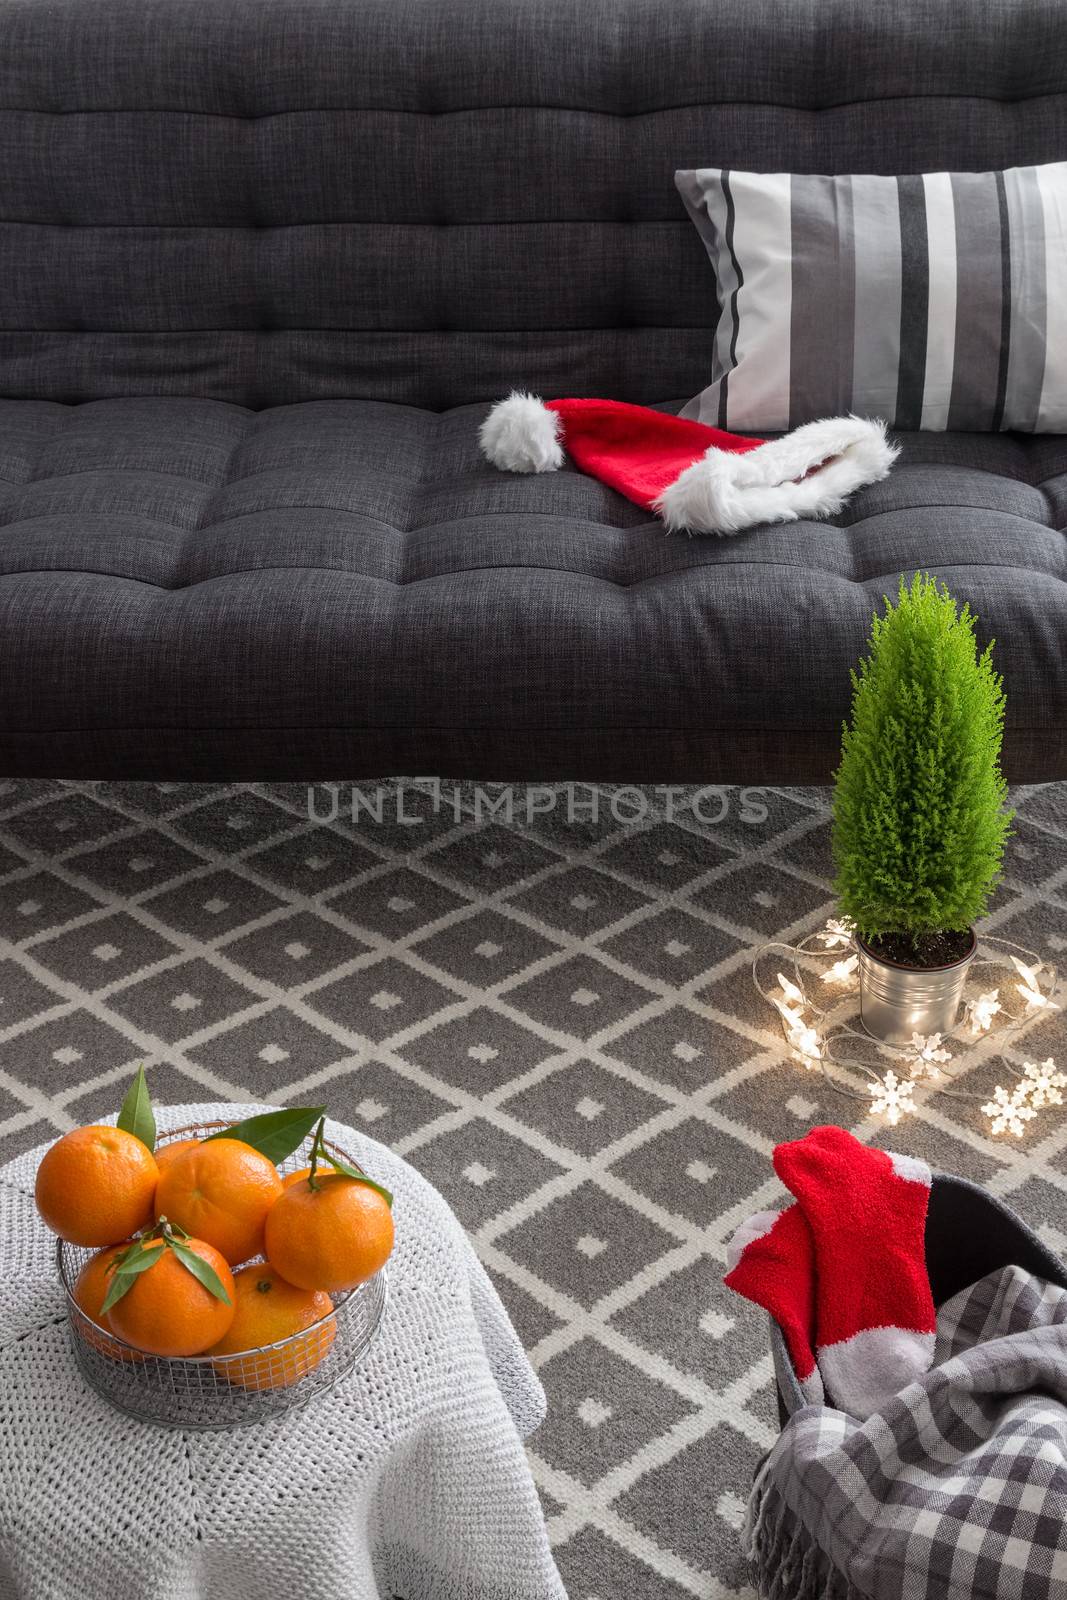 Cozy interior with Christmas decorations and little green tree.